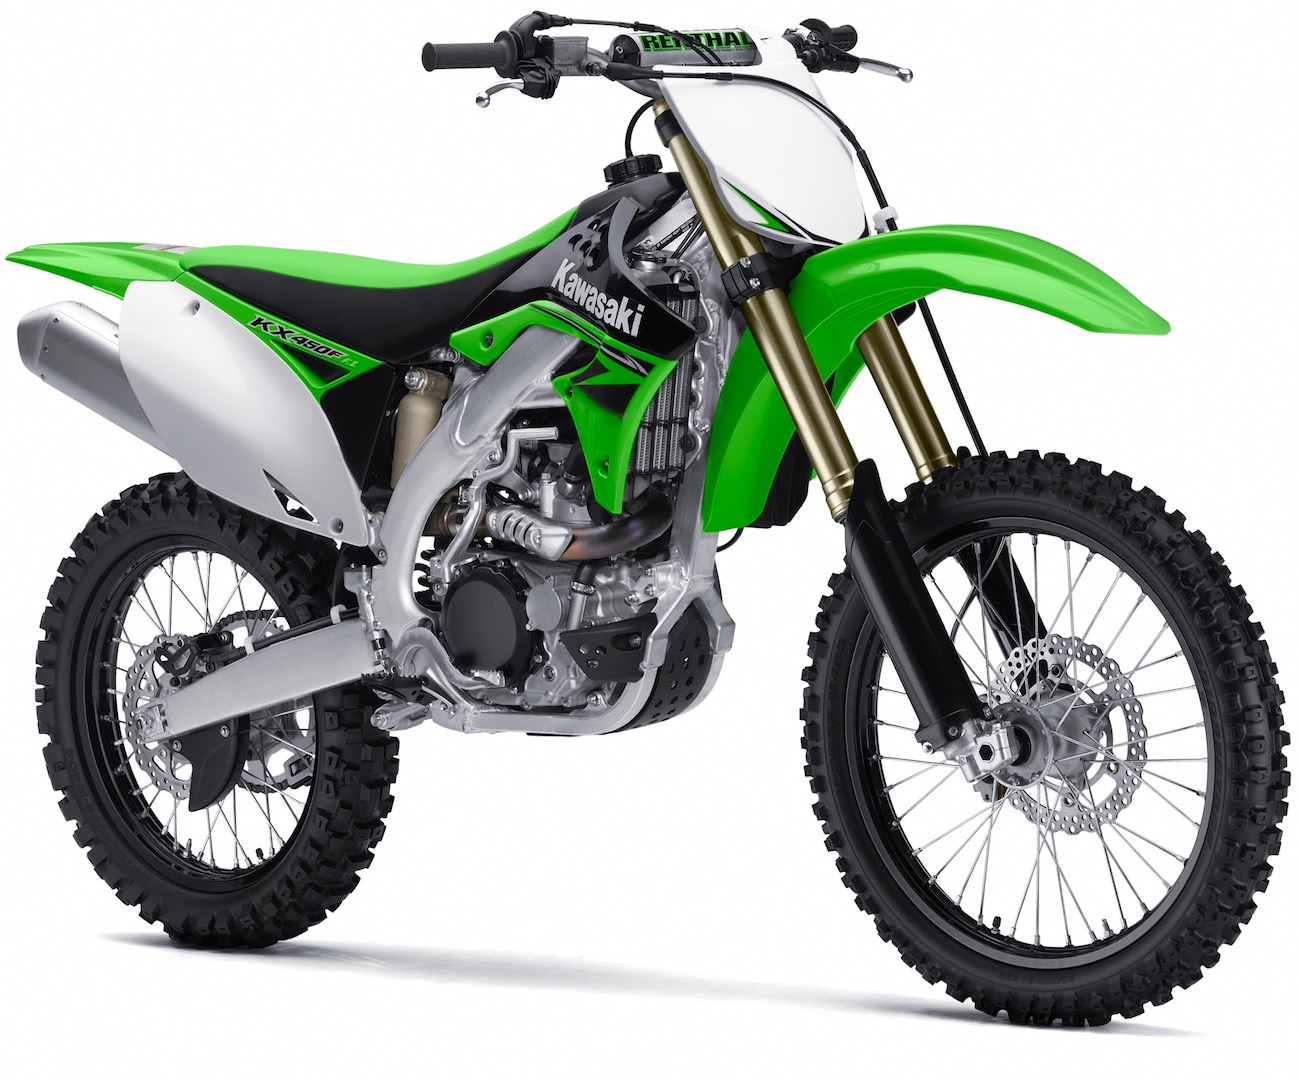 ASK THE MXPERTS: HELP ME WITH MY GARAGE FIND 2009 KAWASAKI - Motocross Action Magazine